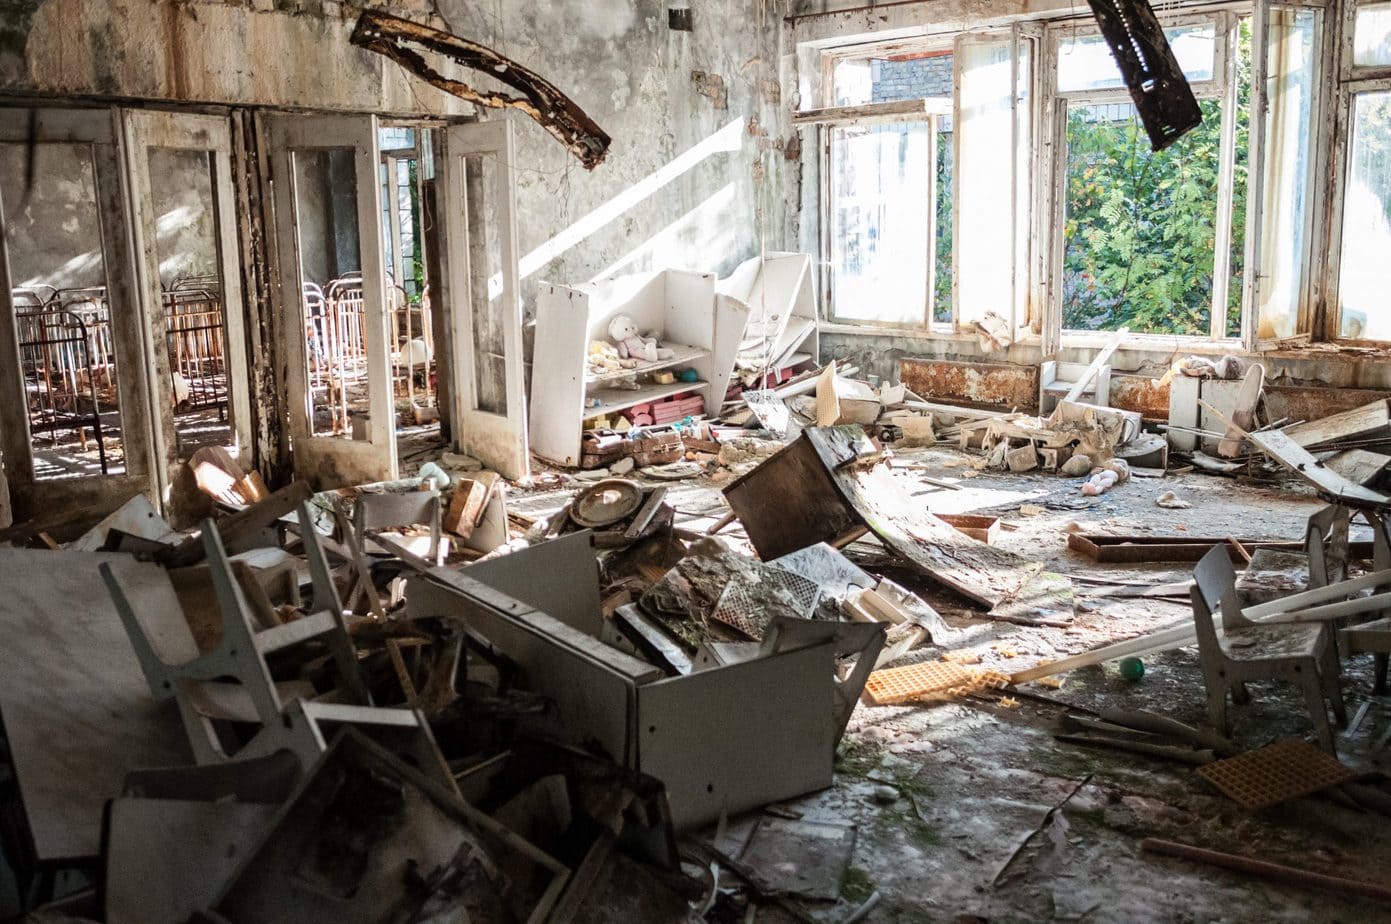 Exploring Chernobyl – how to prepare for a trip to the Chernobyl Exclusion Zone?